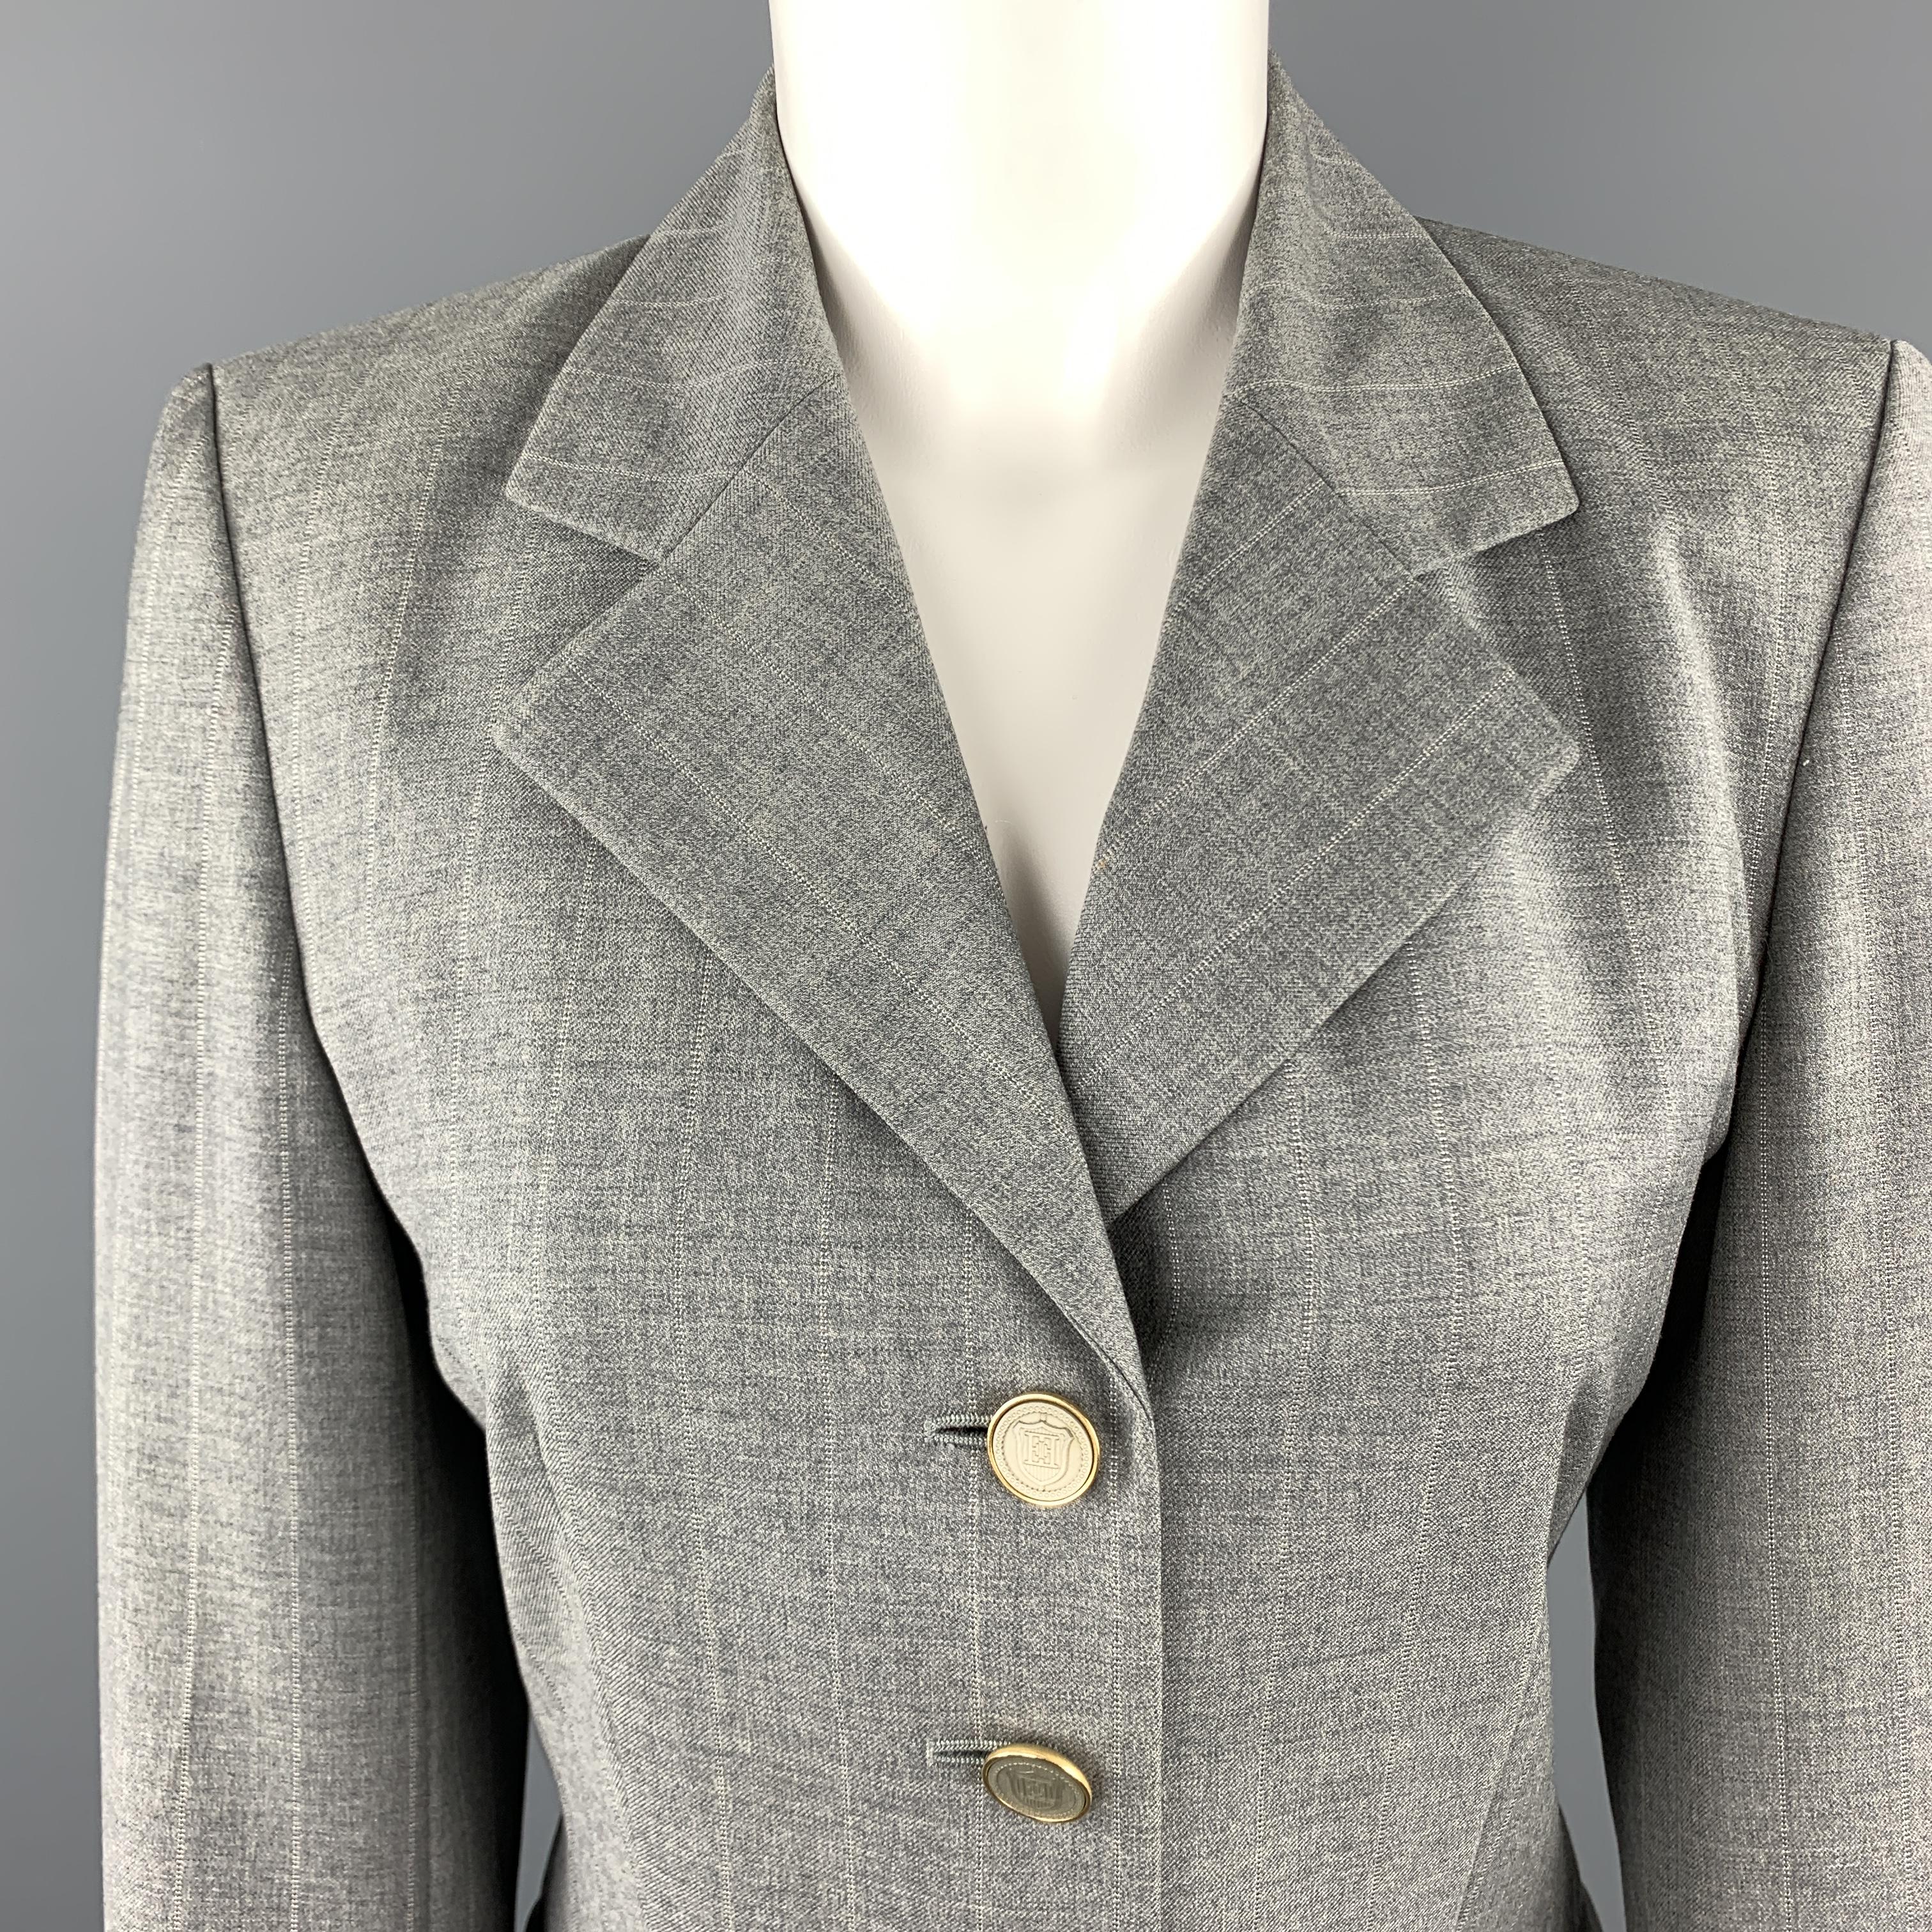 ESCADA jacket comes in grau plaid Ermenegildo Zegna Certified Australian virgin wool with a pointed lapel, single button front, and button detailed cuffs with gold tone metal enamel crest buttons throughout. Made in Germany.

Excellent Pre-Owned